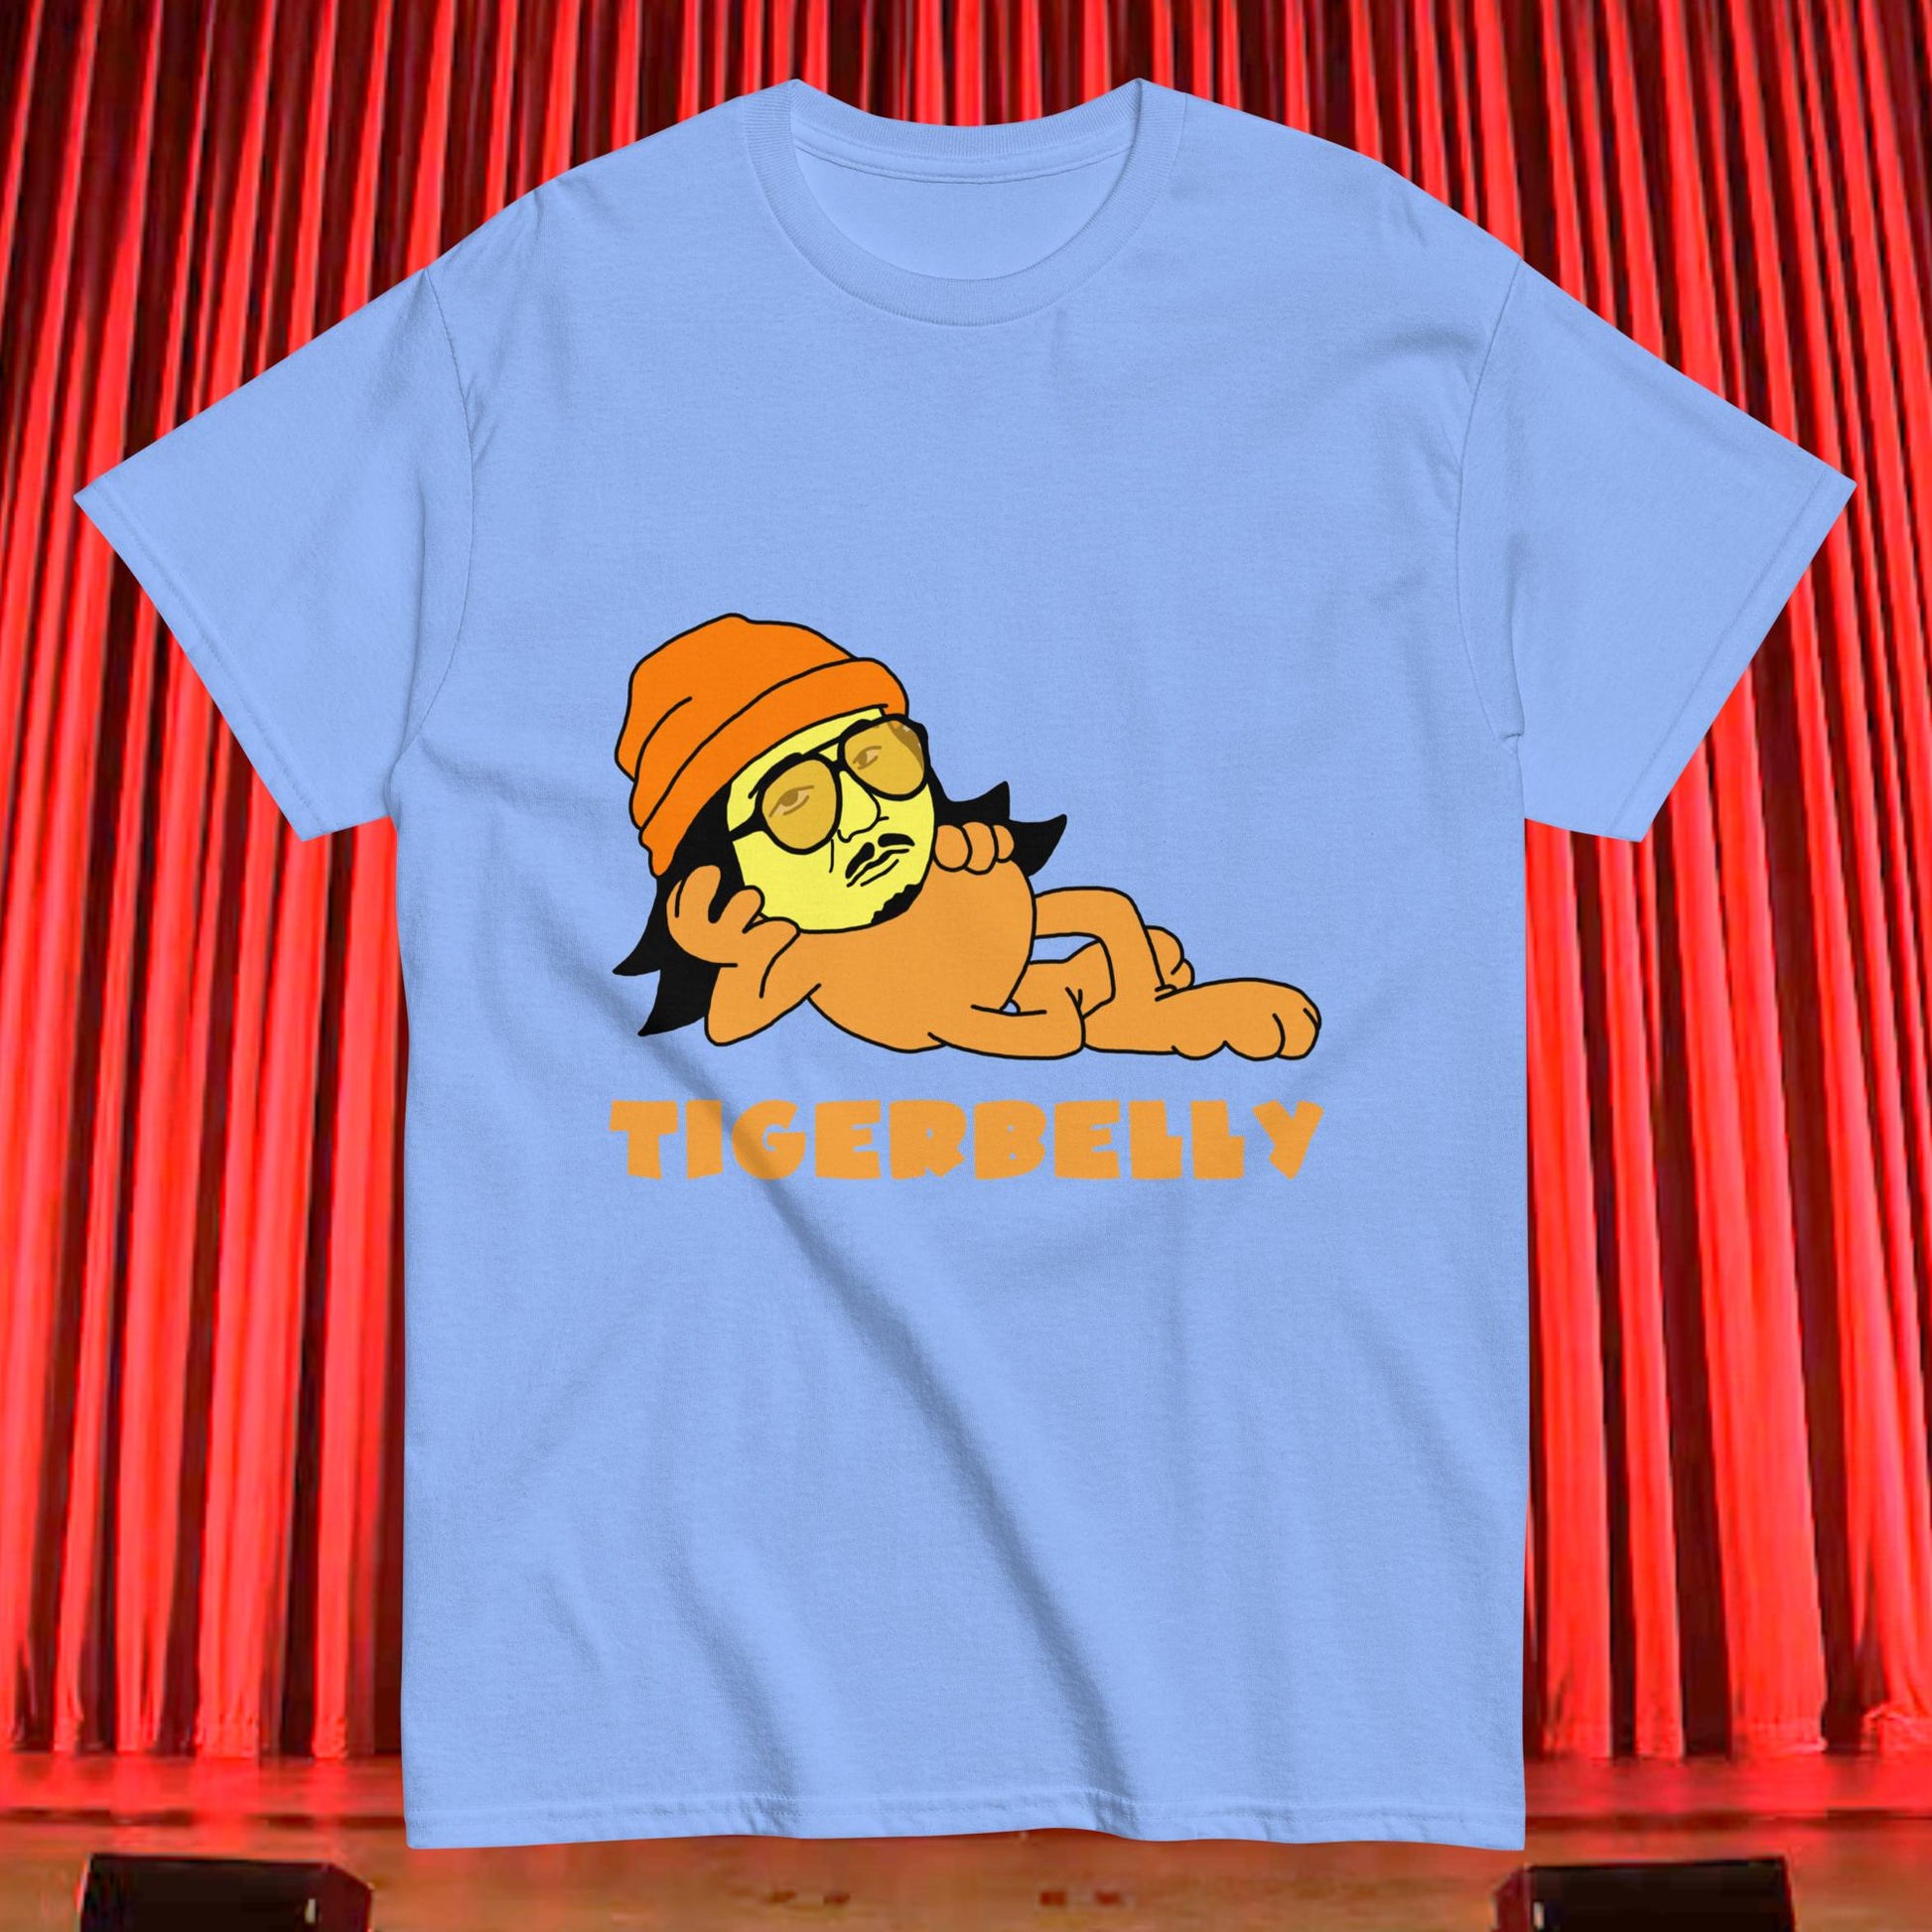 Bobby Lee Tigerbelly, Bobby Lee Merch, Tigerbelly Merch, Bobby Lee Gift, Funny Tigerbelly Gift, Tigerbelly Podcast, TigerBelly T-shirt Next Cult Brand Bobby Lee, Podcasts, Stand-up Comedy, TigerBelly